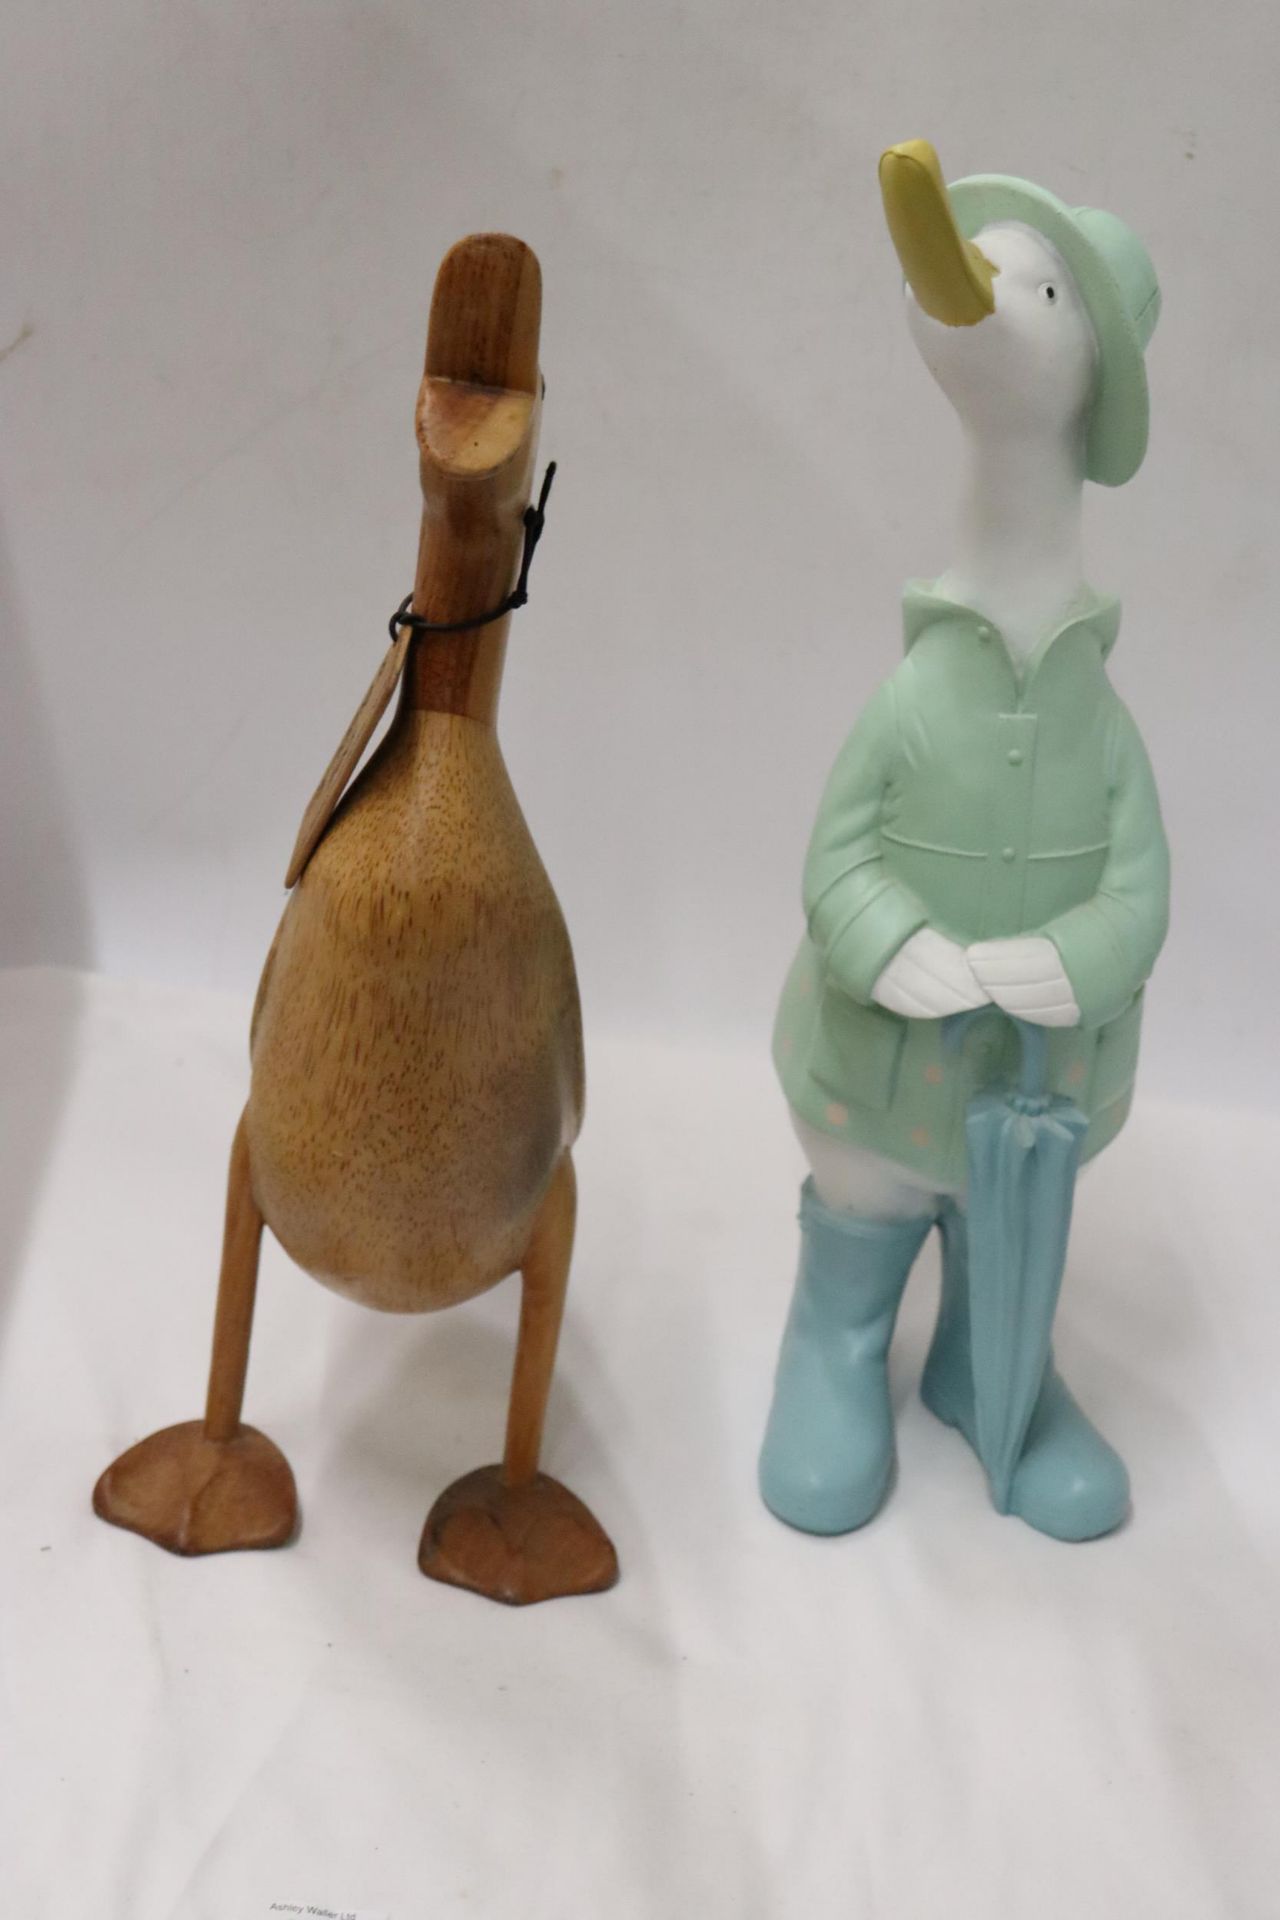 A WOODEN DUCK FROM 'THE DUCK COMPANY' CALLED FRED PLUS A PAINTED DUCK, HEIGHTS 42CM